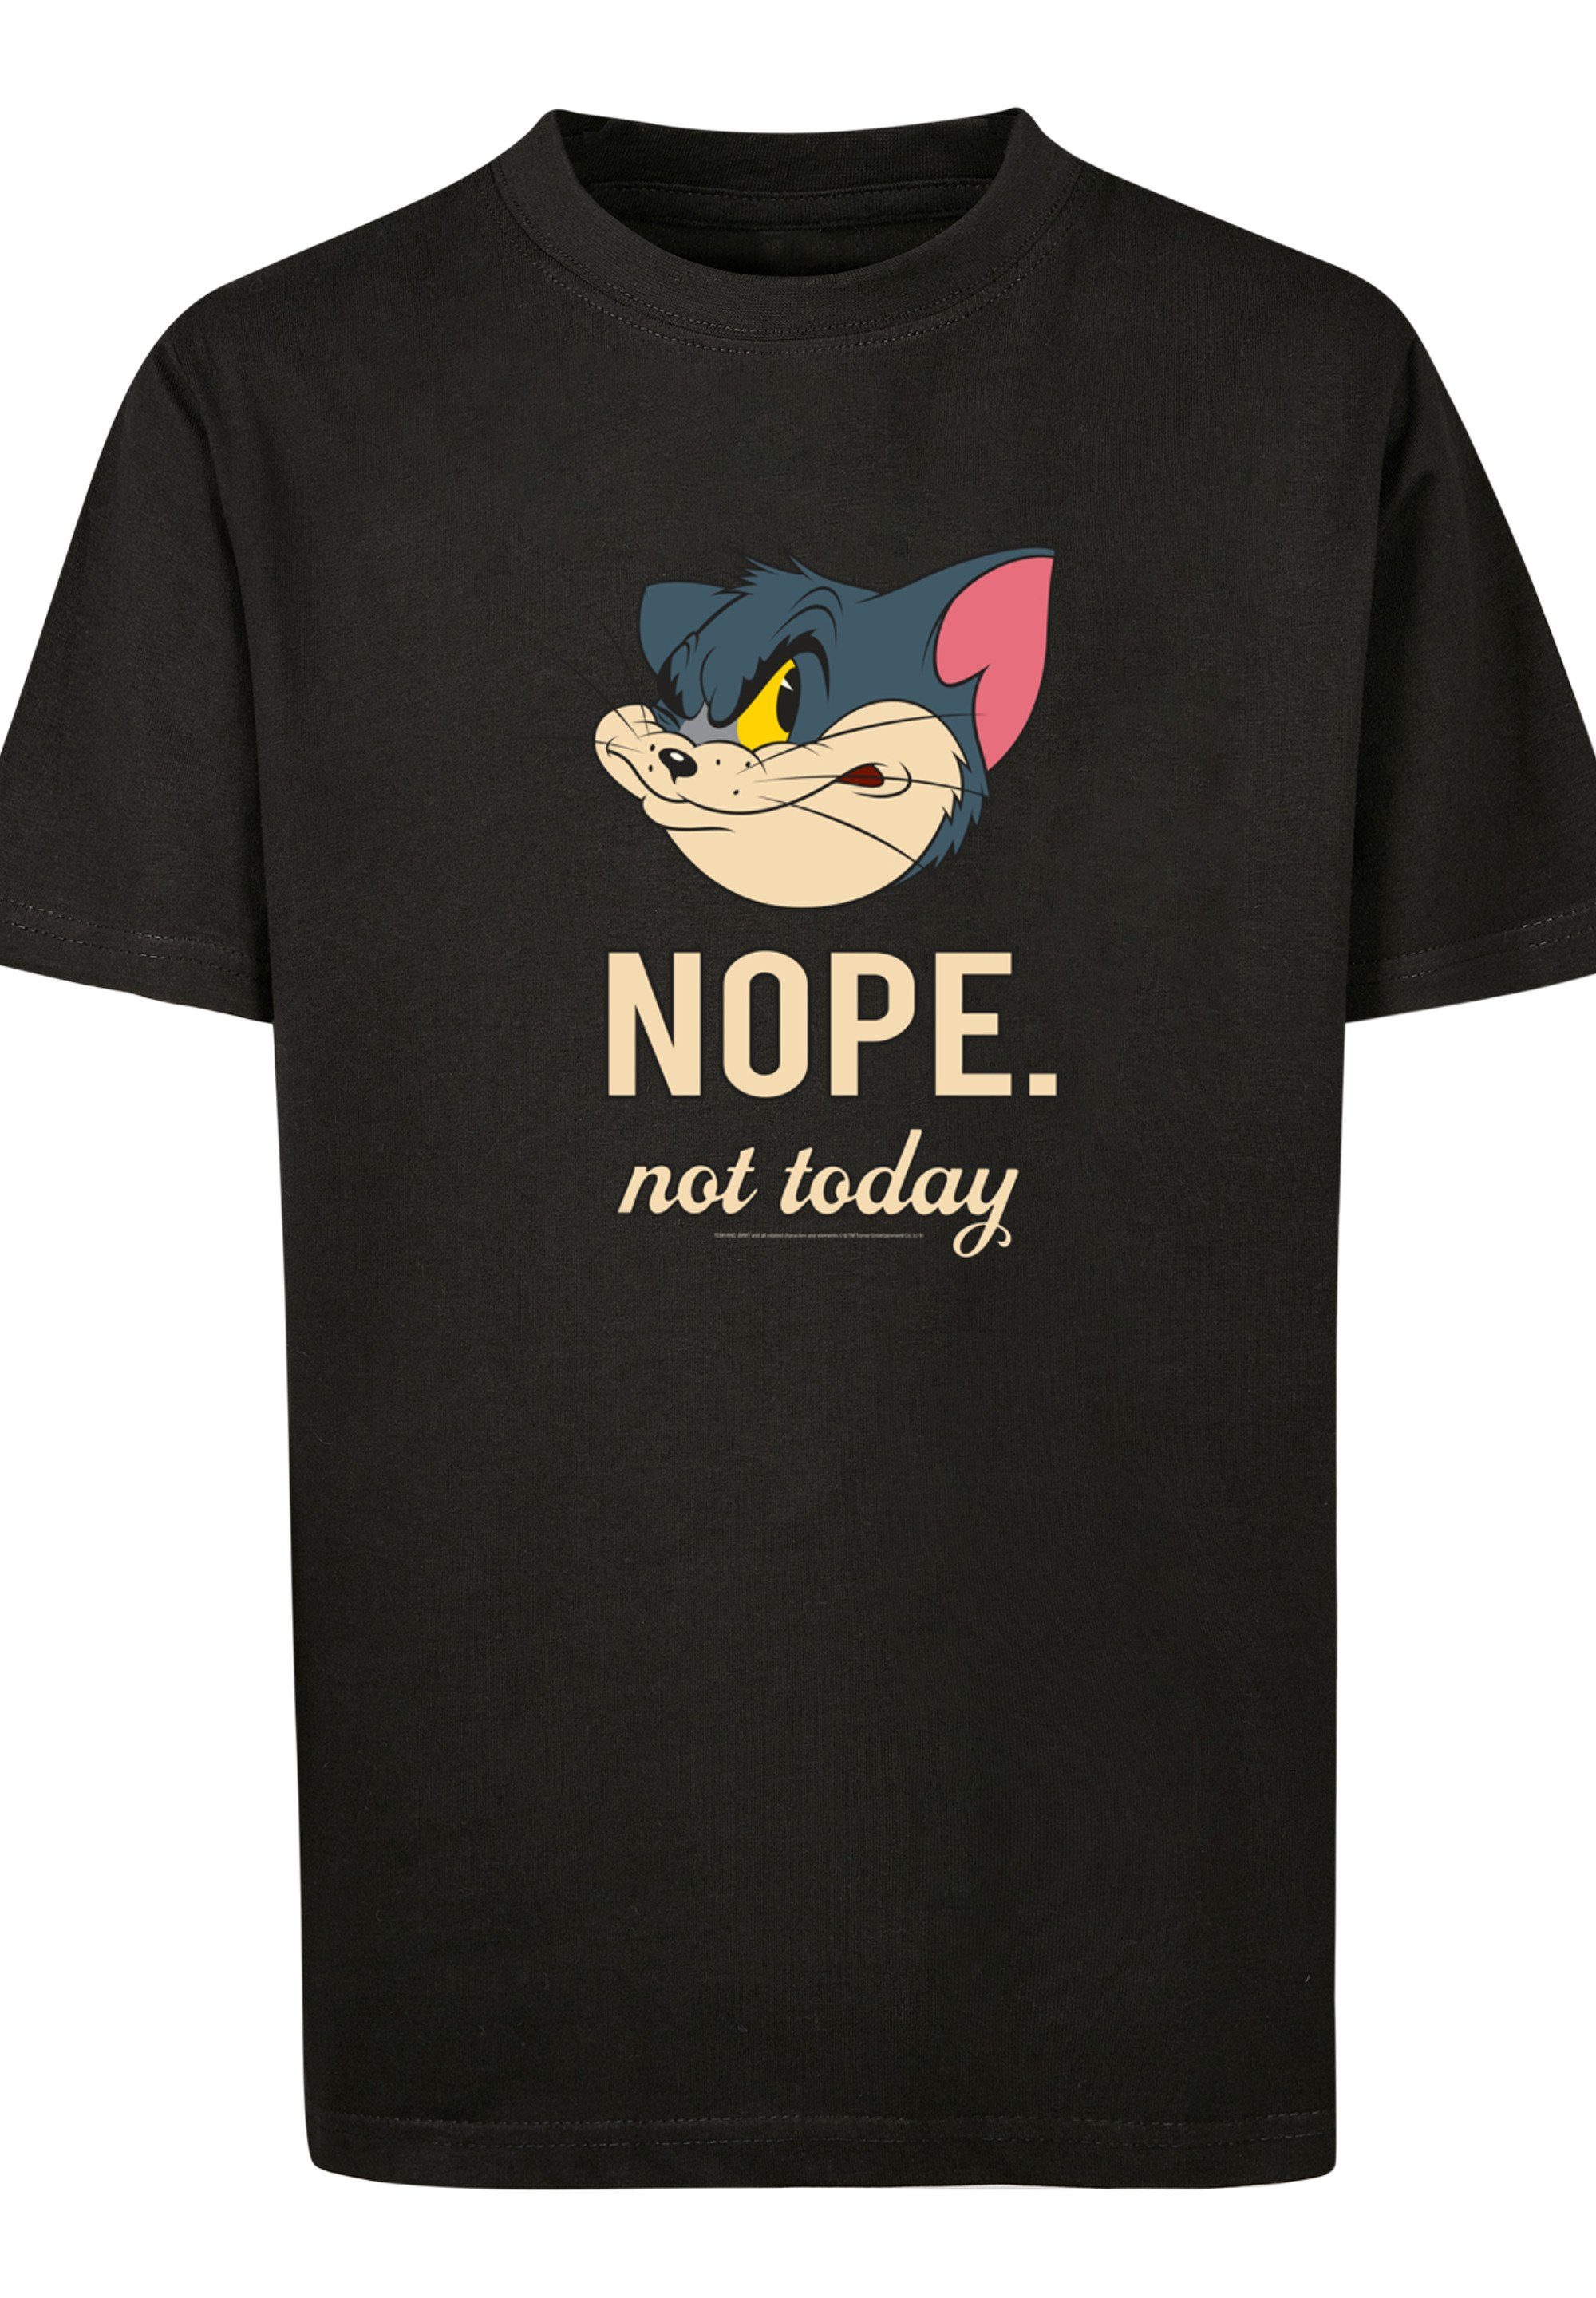 F4NT4STIC T-Shirt Tom and Jerry Print Nope Today Not schwarz TV Serie